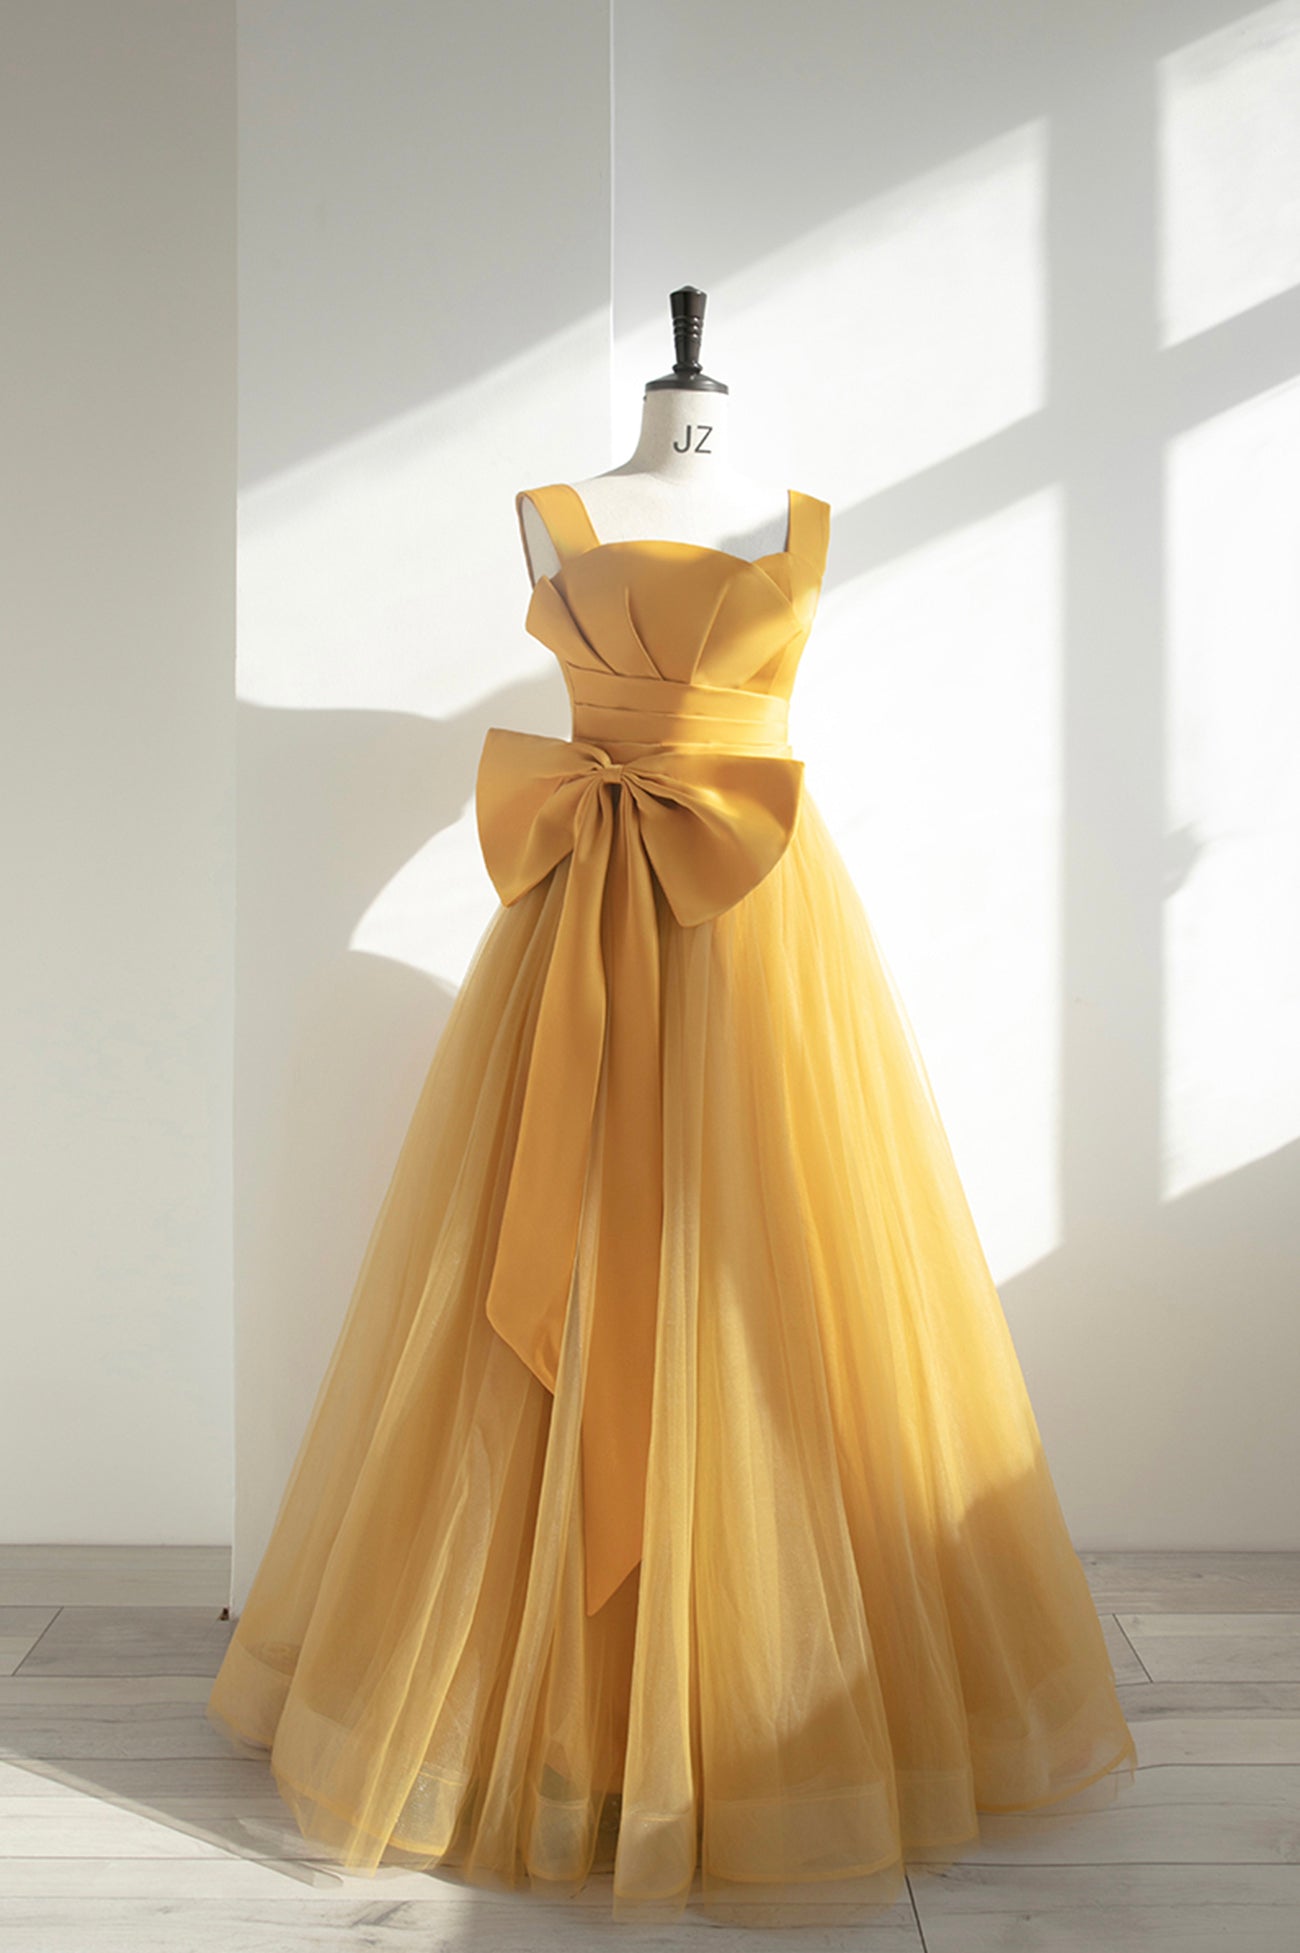 Homecoming Dress Idea, Yellow Tulle Long A-Line Prom Dress, Cute Evening Dress with Bow